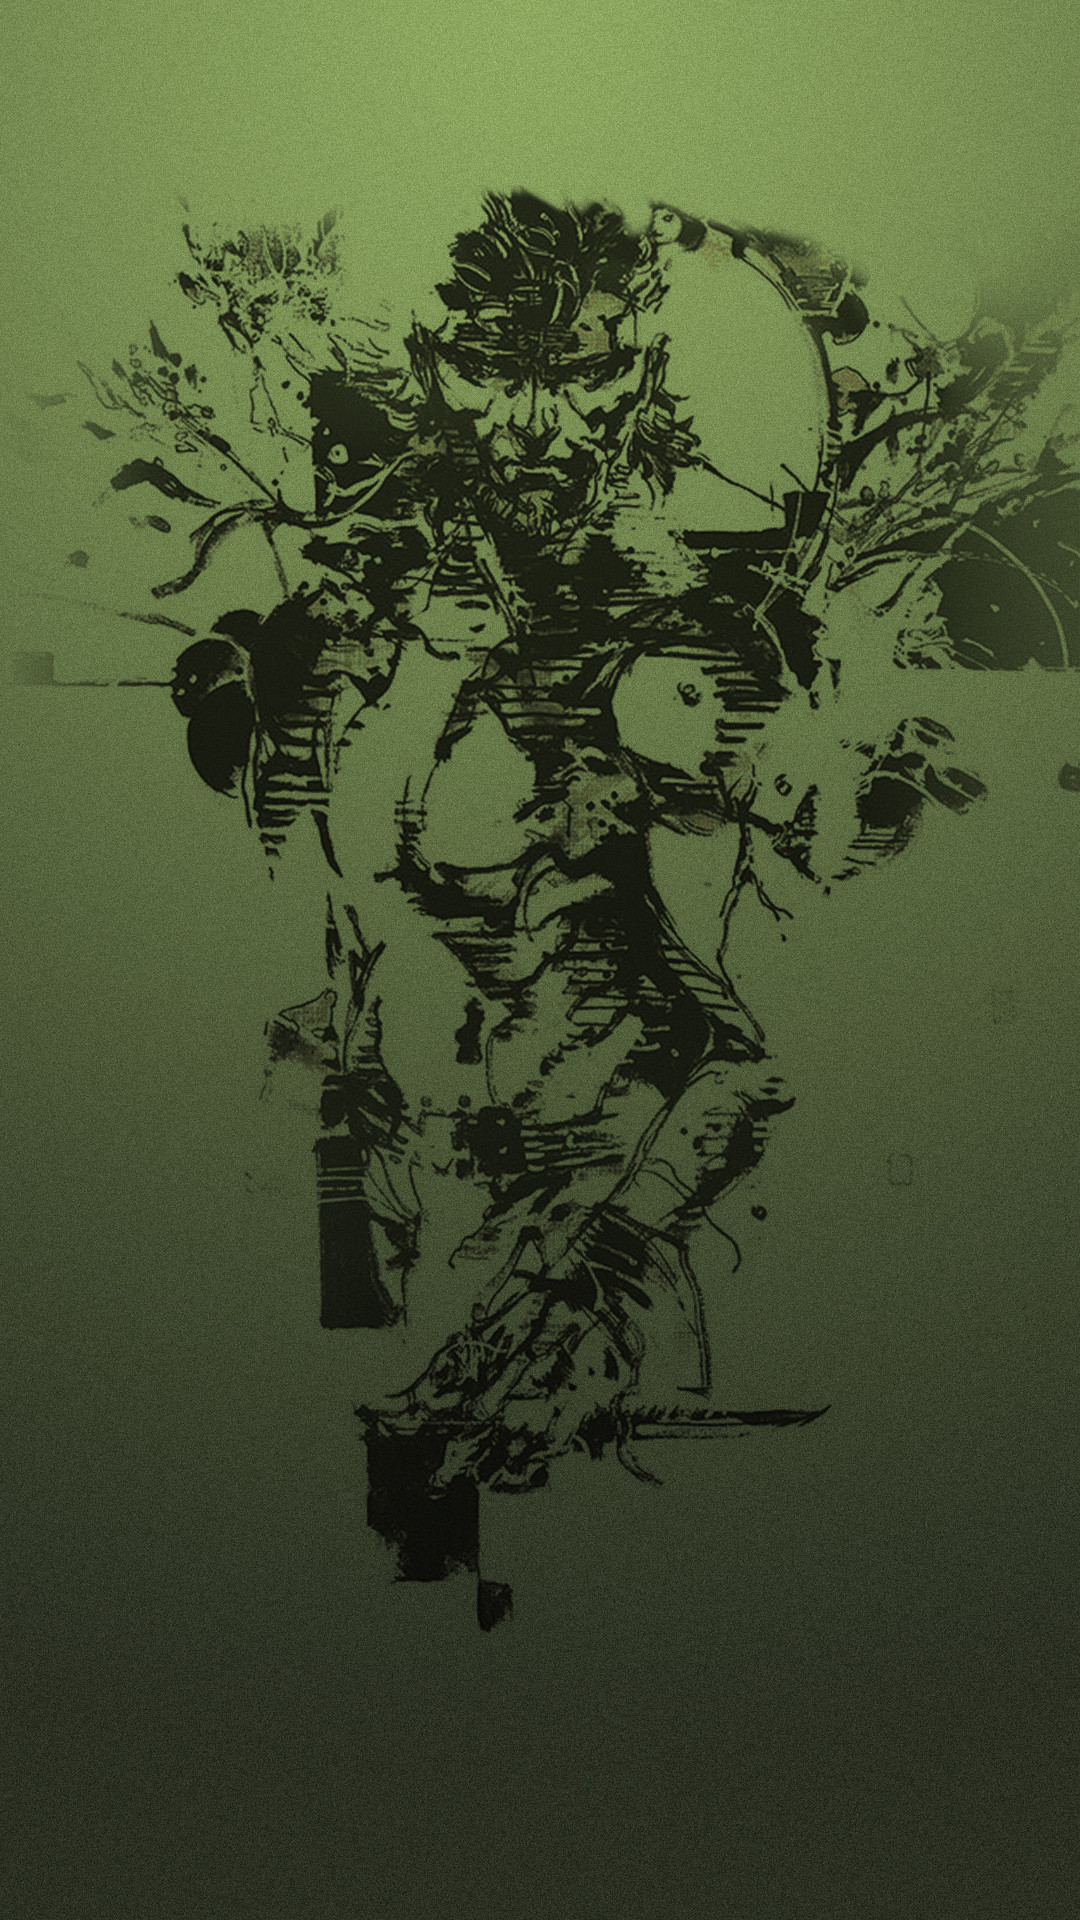 MGS3 and GZ Wallpapers